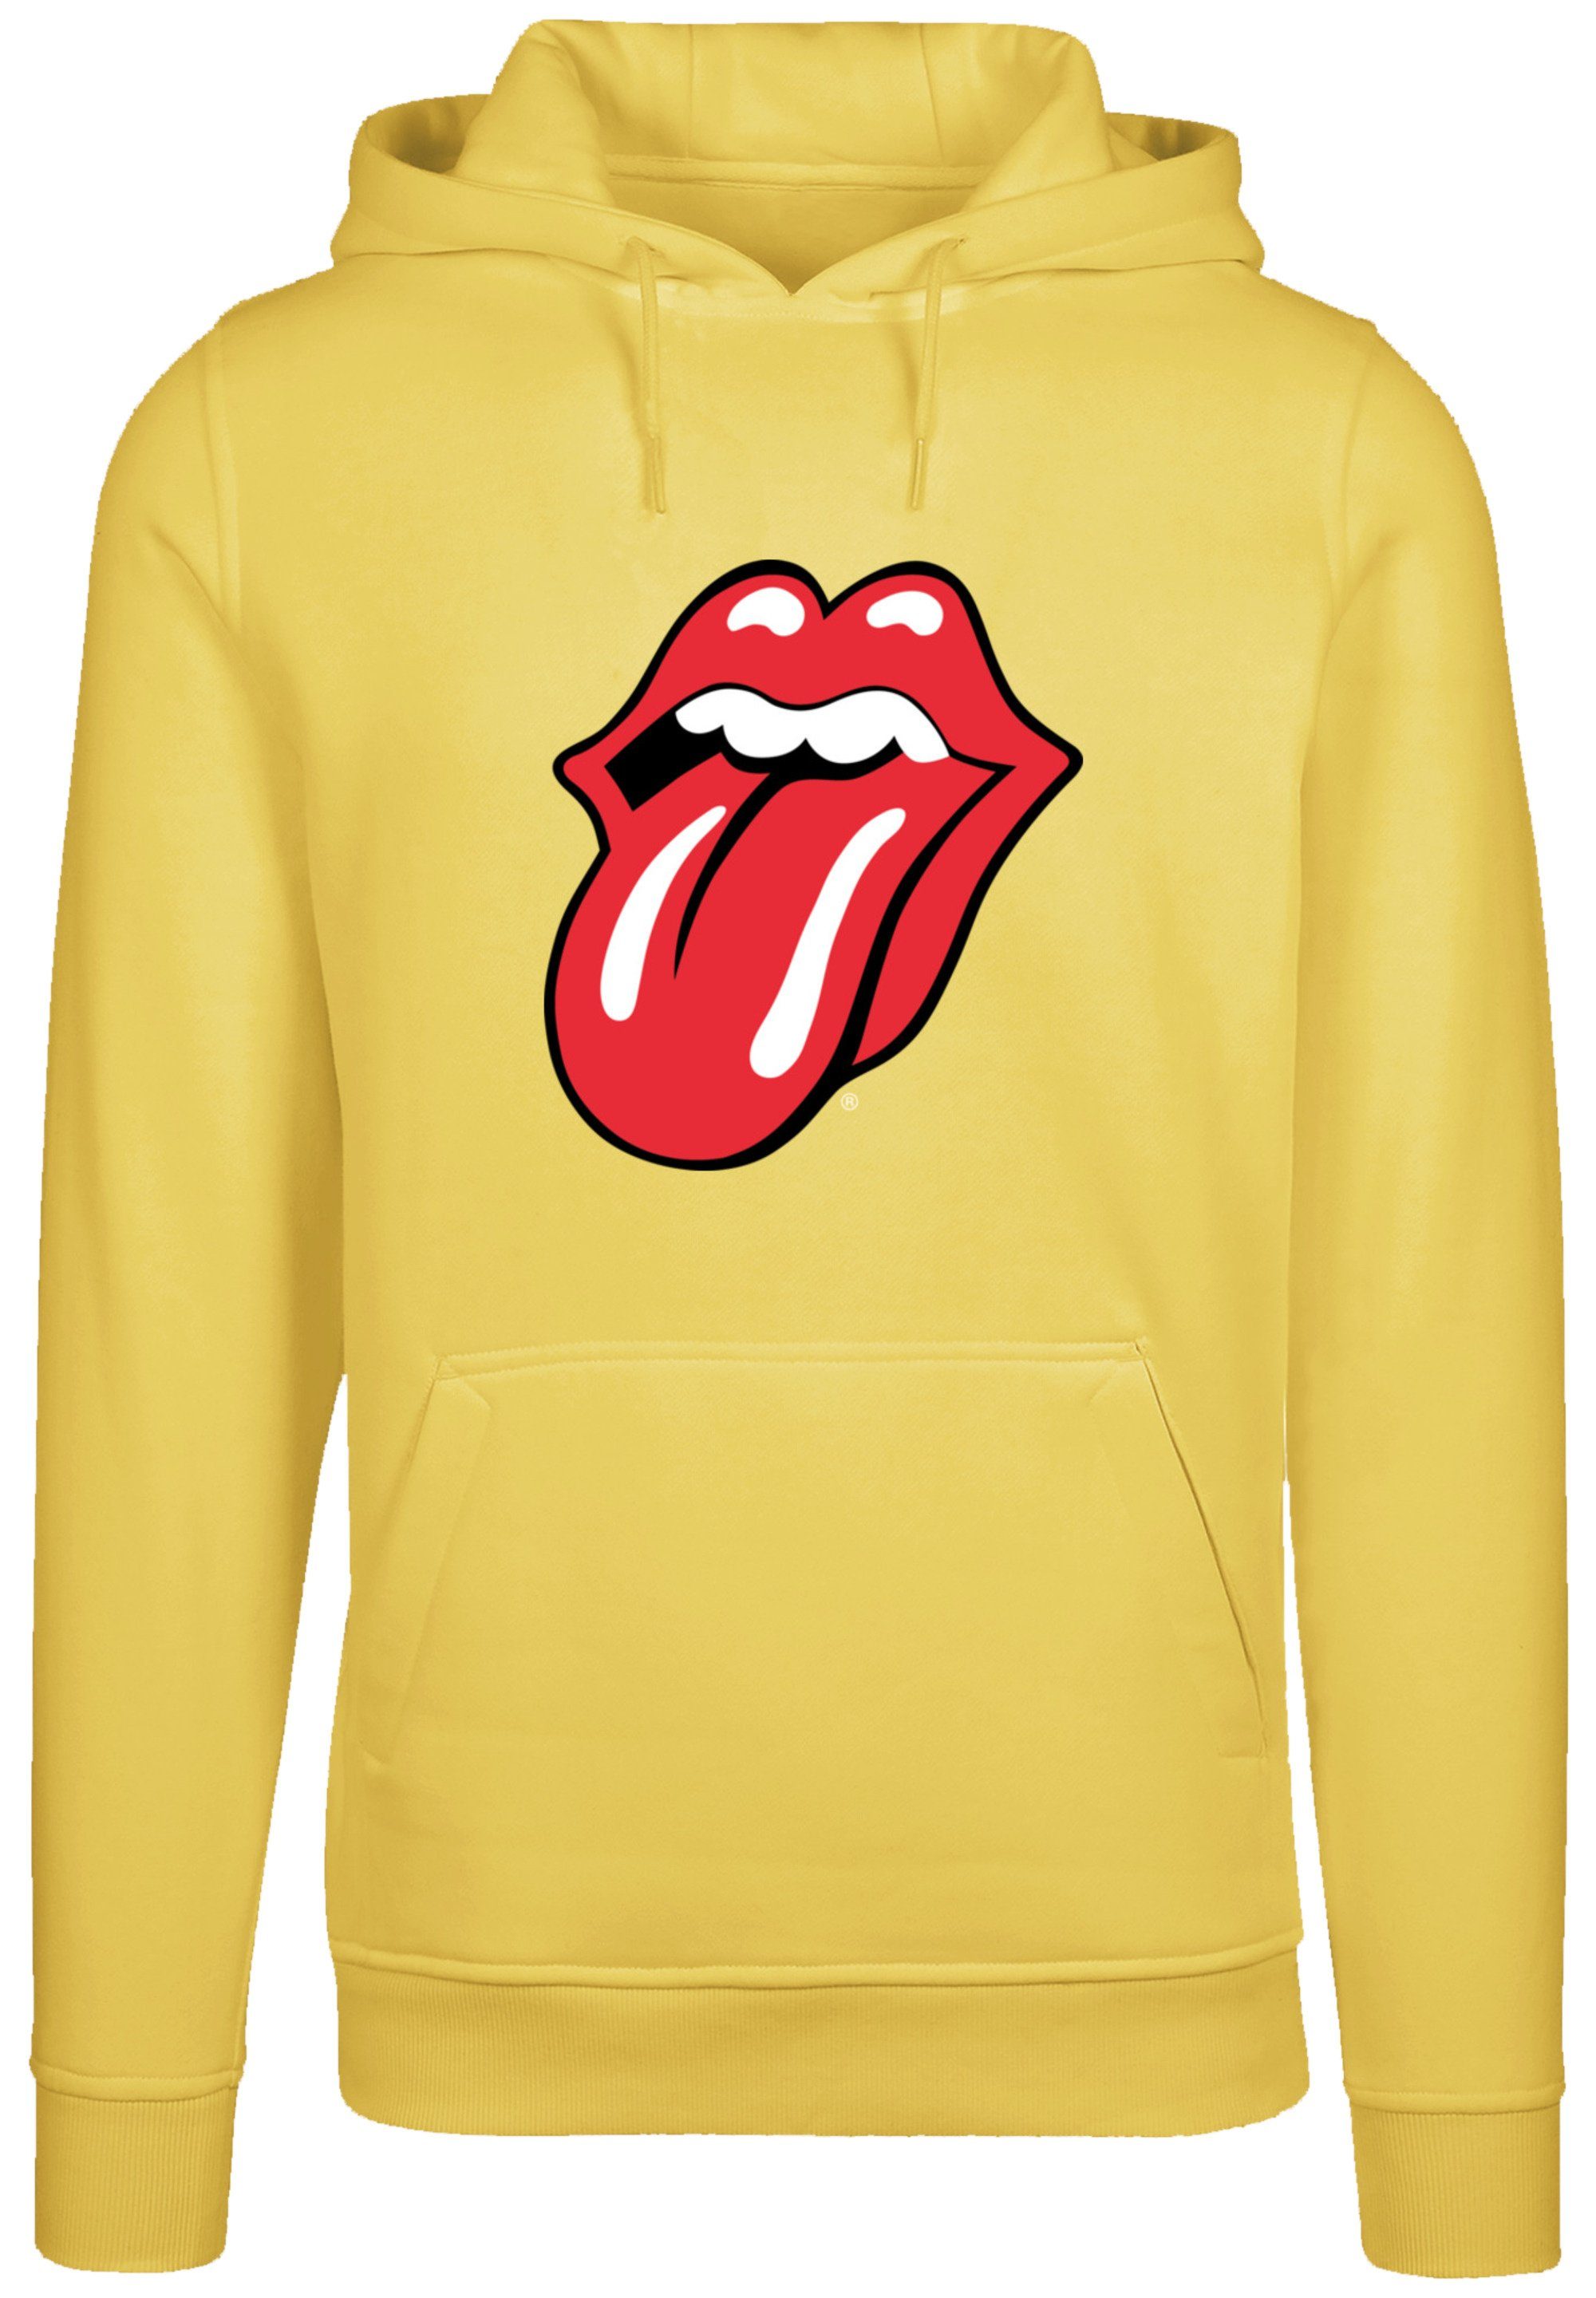 F4NT4STIC Kapuzenpullover The Rolling Stones Classic Zunge Rock Musik Band Hoodie, Warm, Bequem taxi yellow